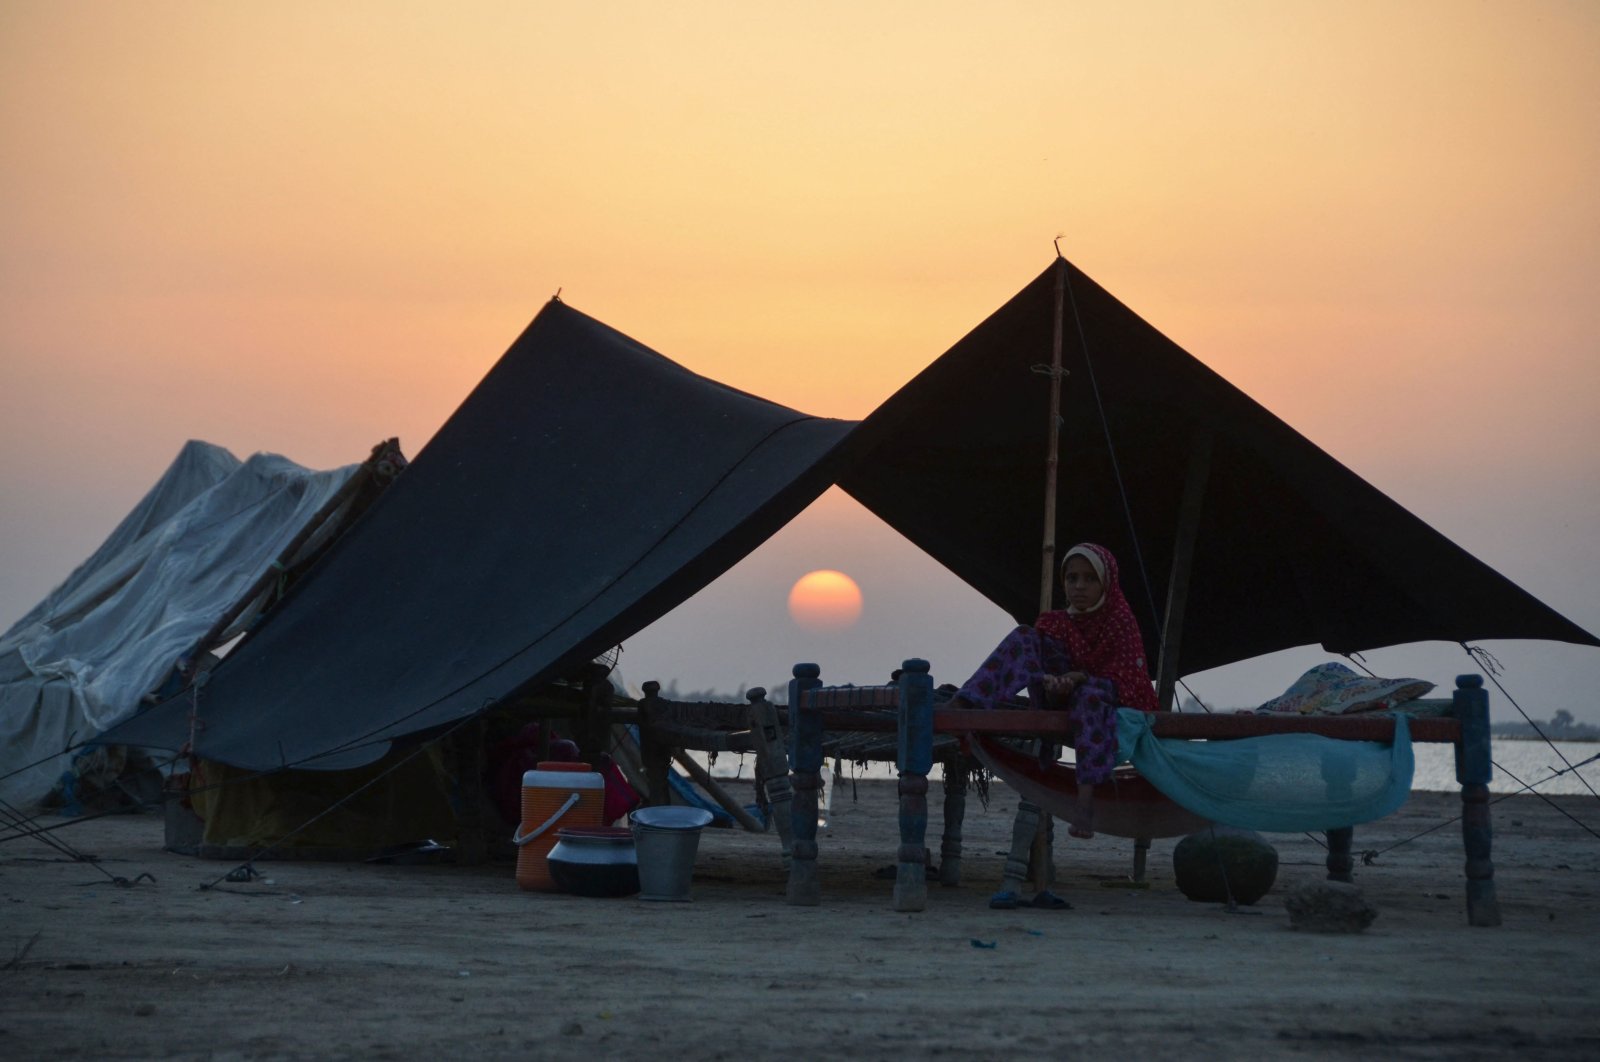 An internally displaced flood-affected girl sits in her tent at sunset at a camp in the flood-hit area in Dera Allah Yar in Jaffarabad district of Balochistan province, Pakistan, Sept. 28, 2022. (AFP Photo)